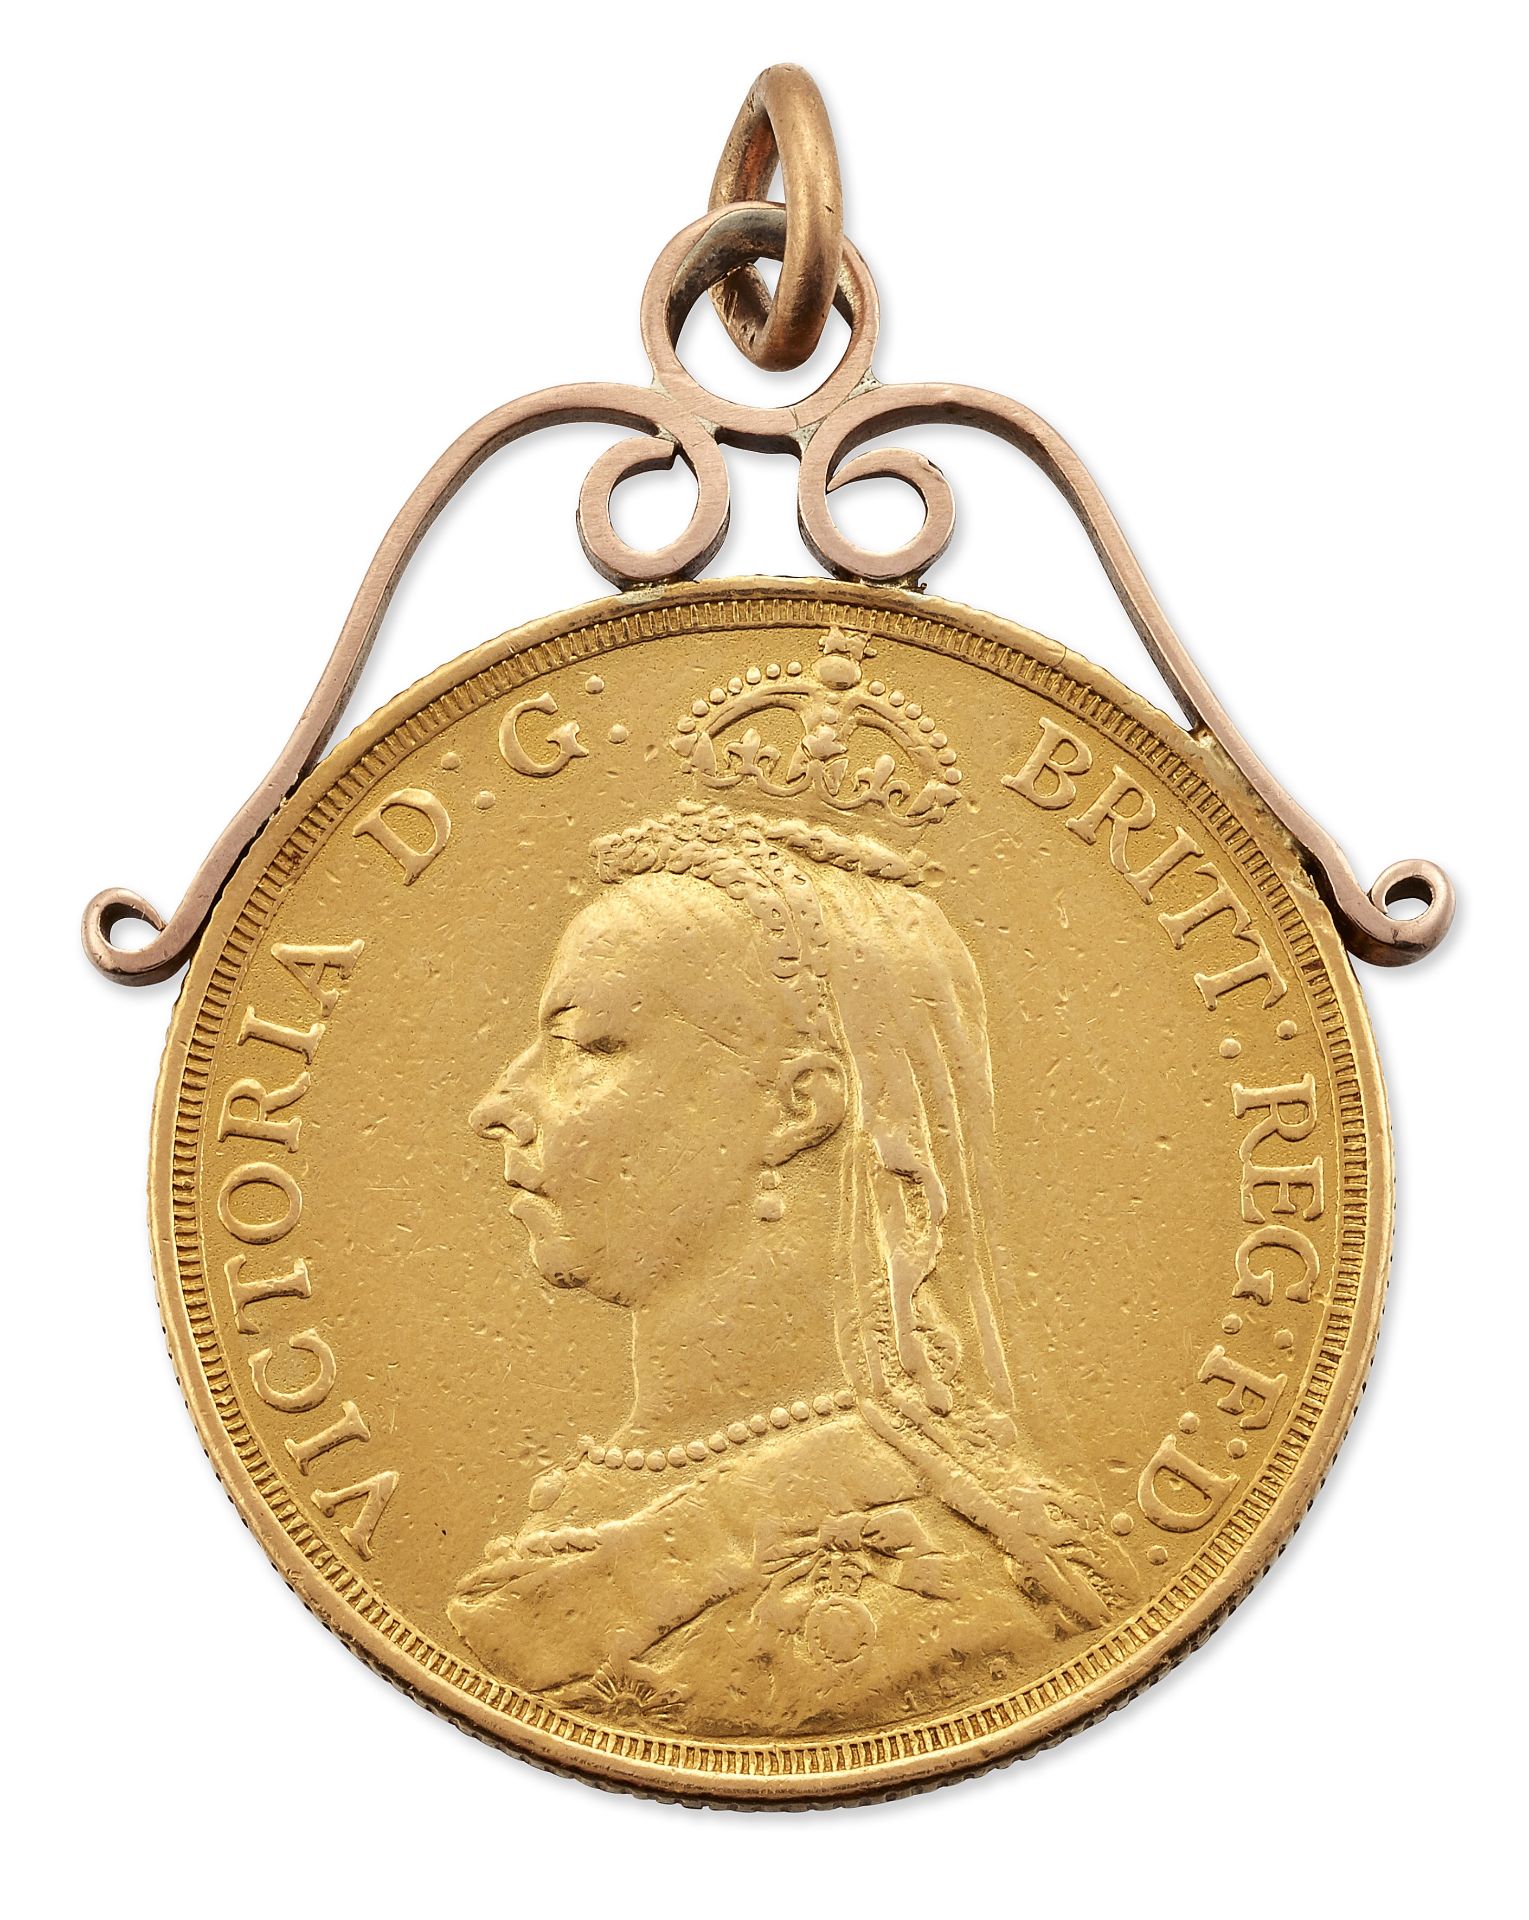 AN 1887 VICTORIA JUBILEE HEAD DOUBLE SOVEREIGN £2 COIN, SOLDERED AS A PENDANT